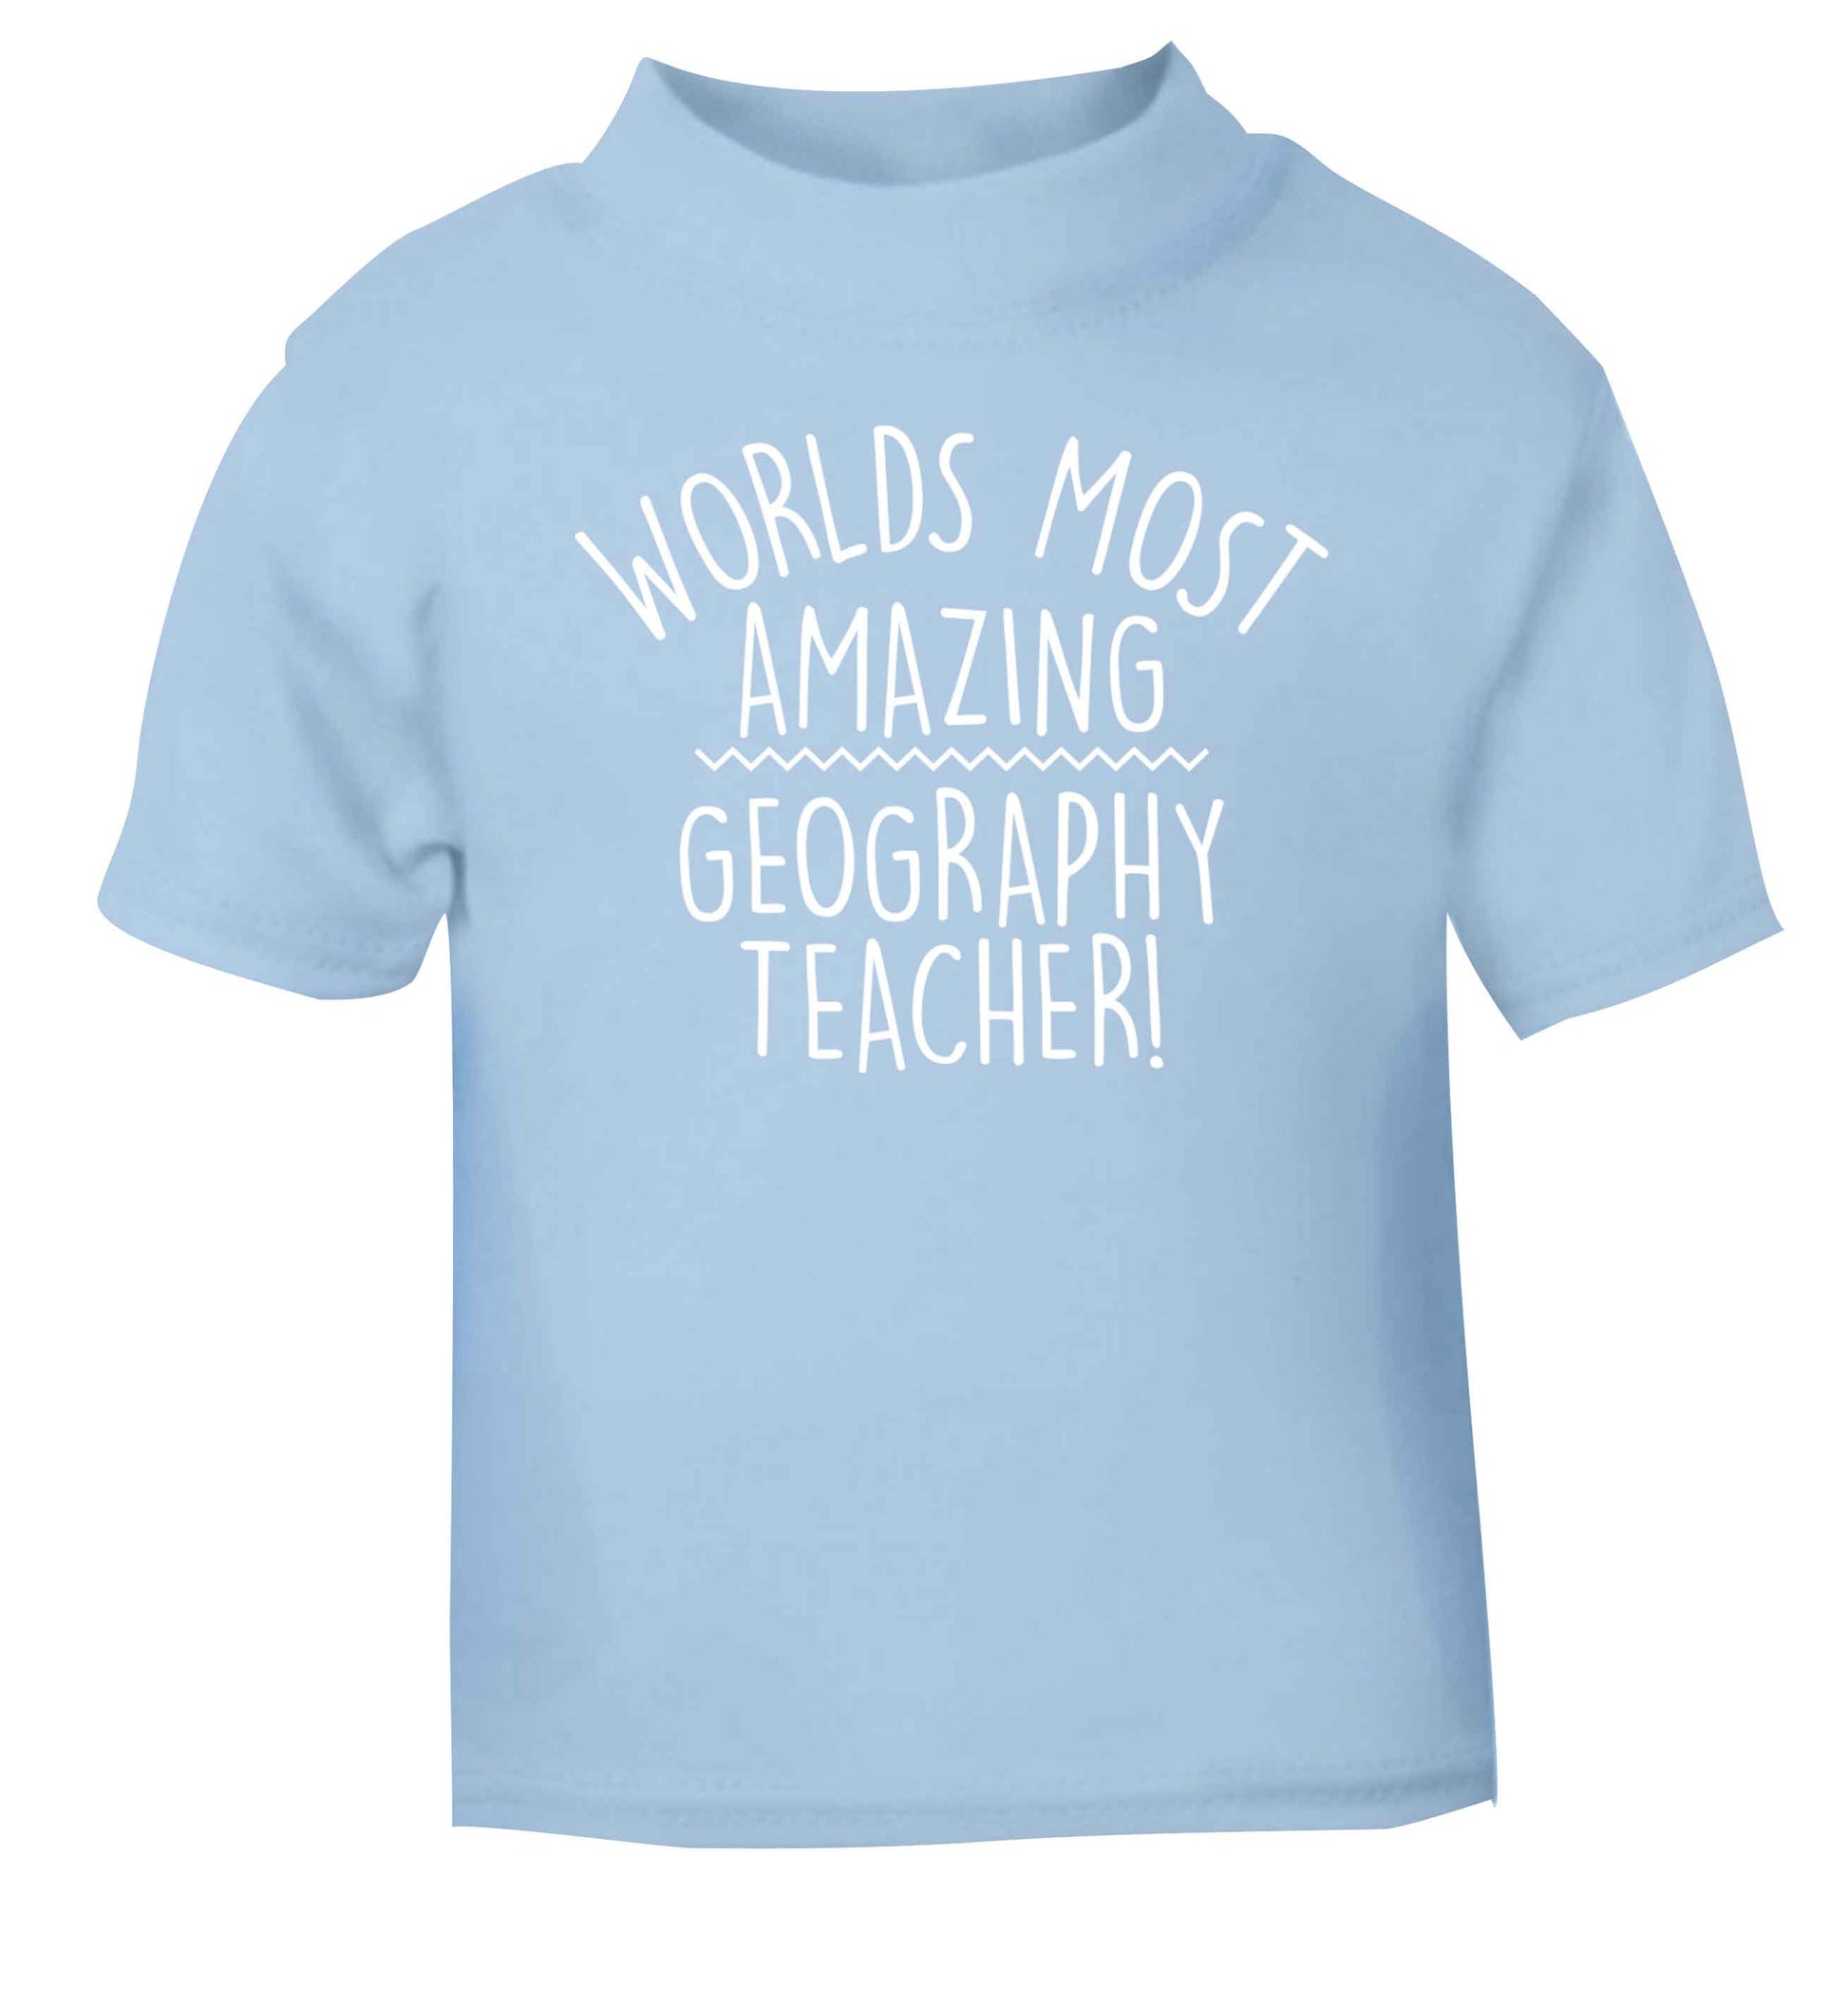 Worlds most amazing geography teacher light blue baby toddler Tshirt 2 Years